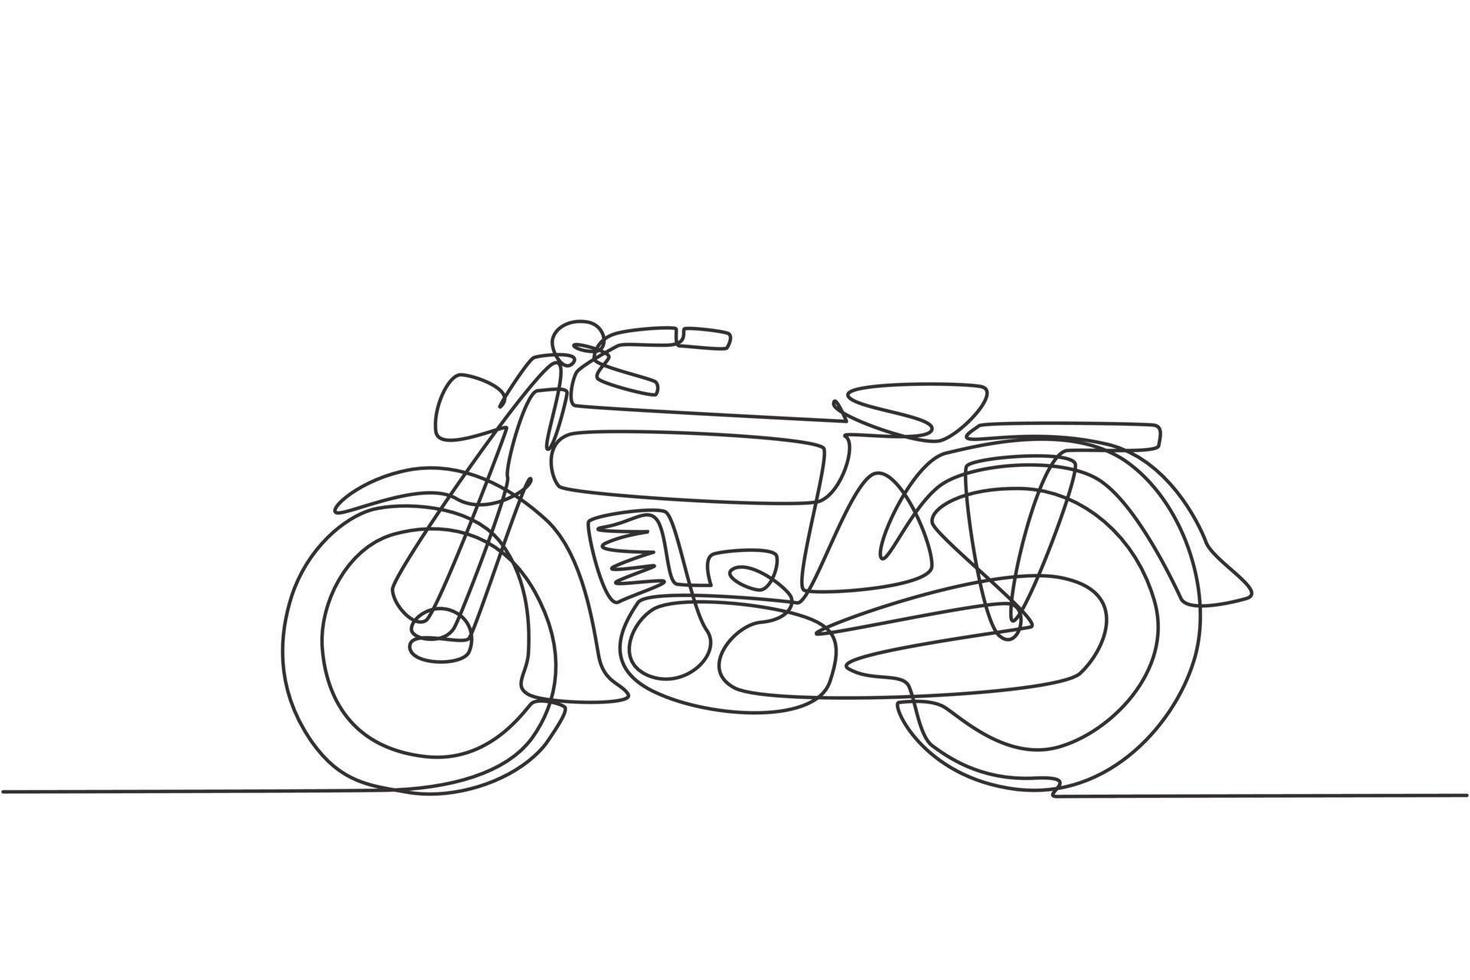 One single line drawing of old retro vintage motorcycle. Vintage motorbike transportation concept continuous line graphic draw design vector illustration